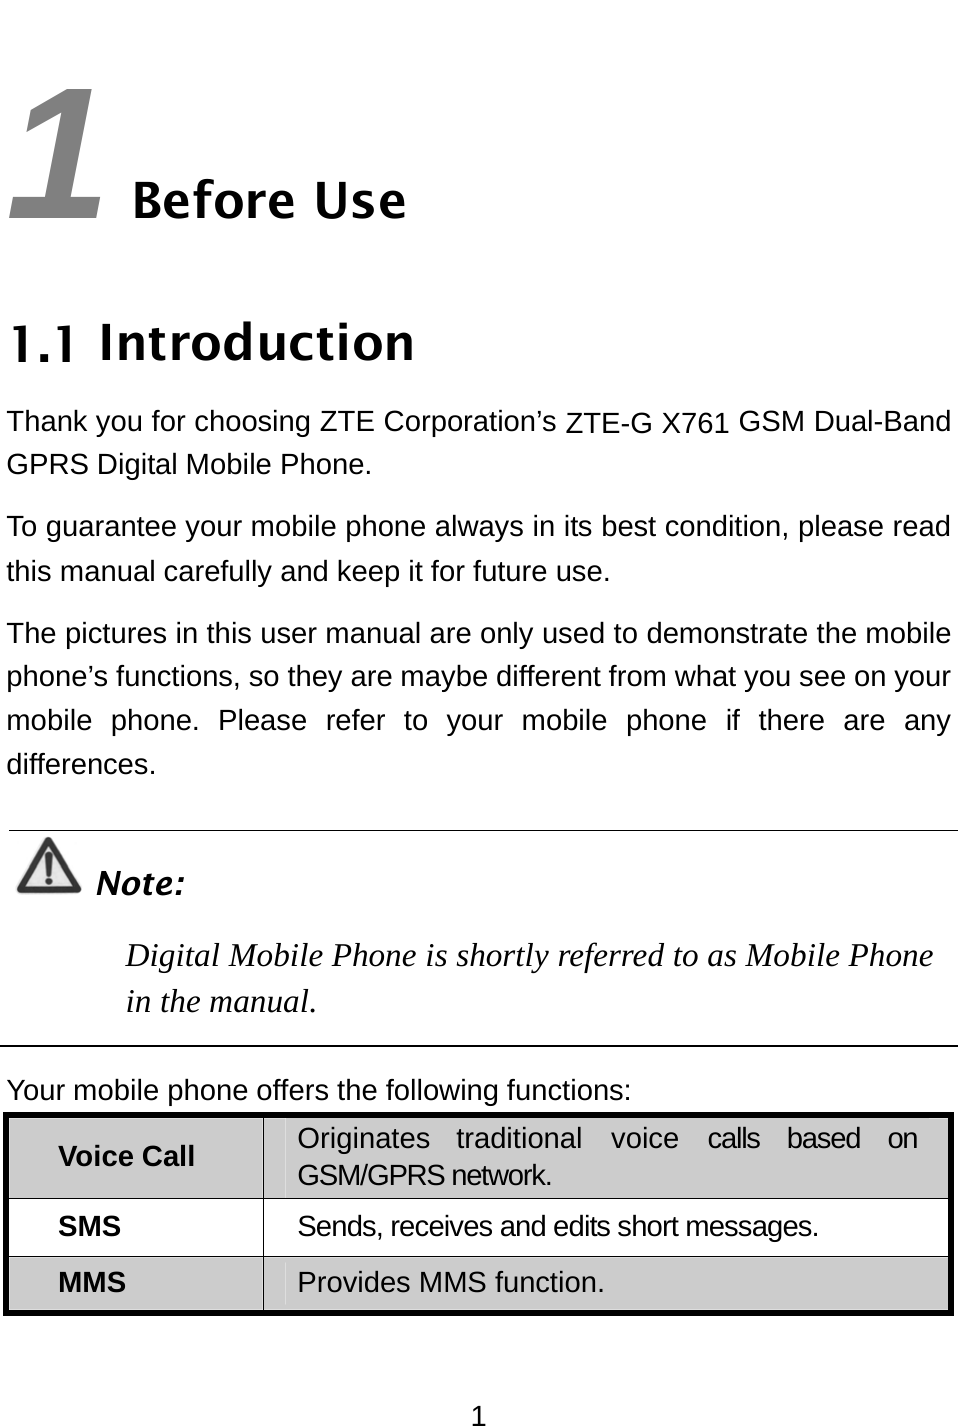  1 1 Before Use 1.1 Introduction Thank you for choosing ZTE Corporation’s ZTE-G X761 GSM Dual-Band GPRS Digital Mobile Phone. To guarantee your mobile phone always in its best condition, please read this manual carefully and keep it for future use. The pictures in this user manual are only used to demonstrate the mobile phone’s functions, so they are maybe different from what you see on your mobile phone. Please refer to your mobile phone if there are any differences.  Note: Digital Mobile Phone is shortly referred to as Mobile Phone in the manual.  Your mobile phone offers the following functions: Voice Call  Originates traditional voice calls based on GSM/GPRS network. SMS  Sends, receives and edits short messages. MMS  Provides MMS function. 